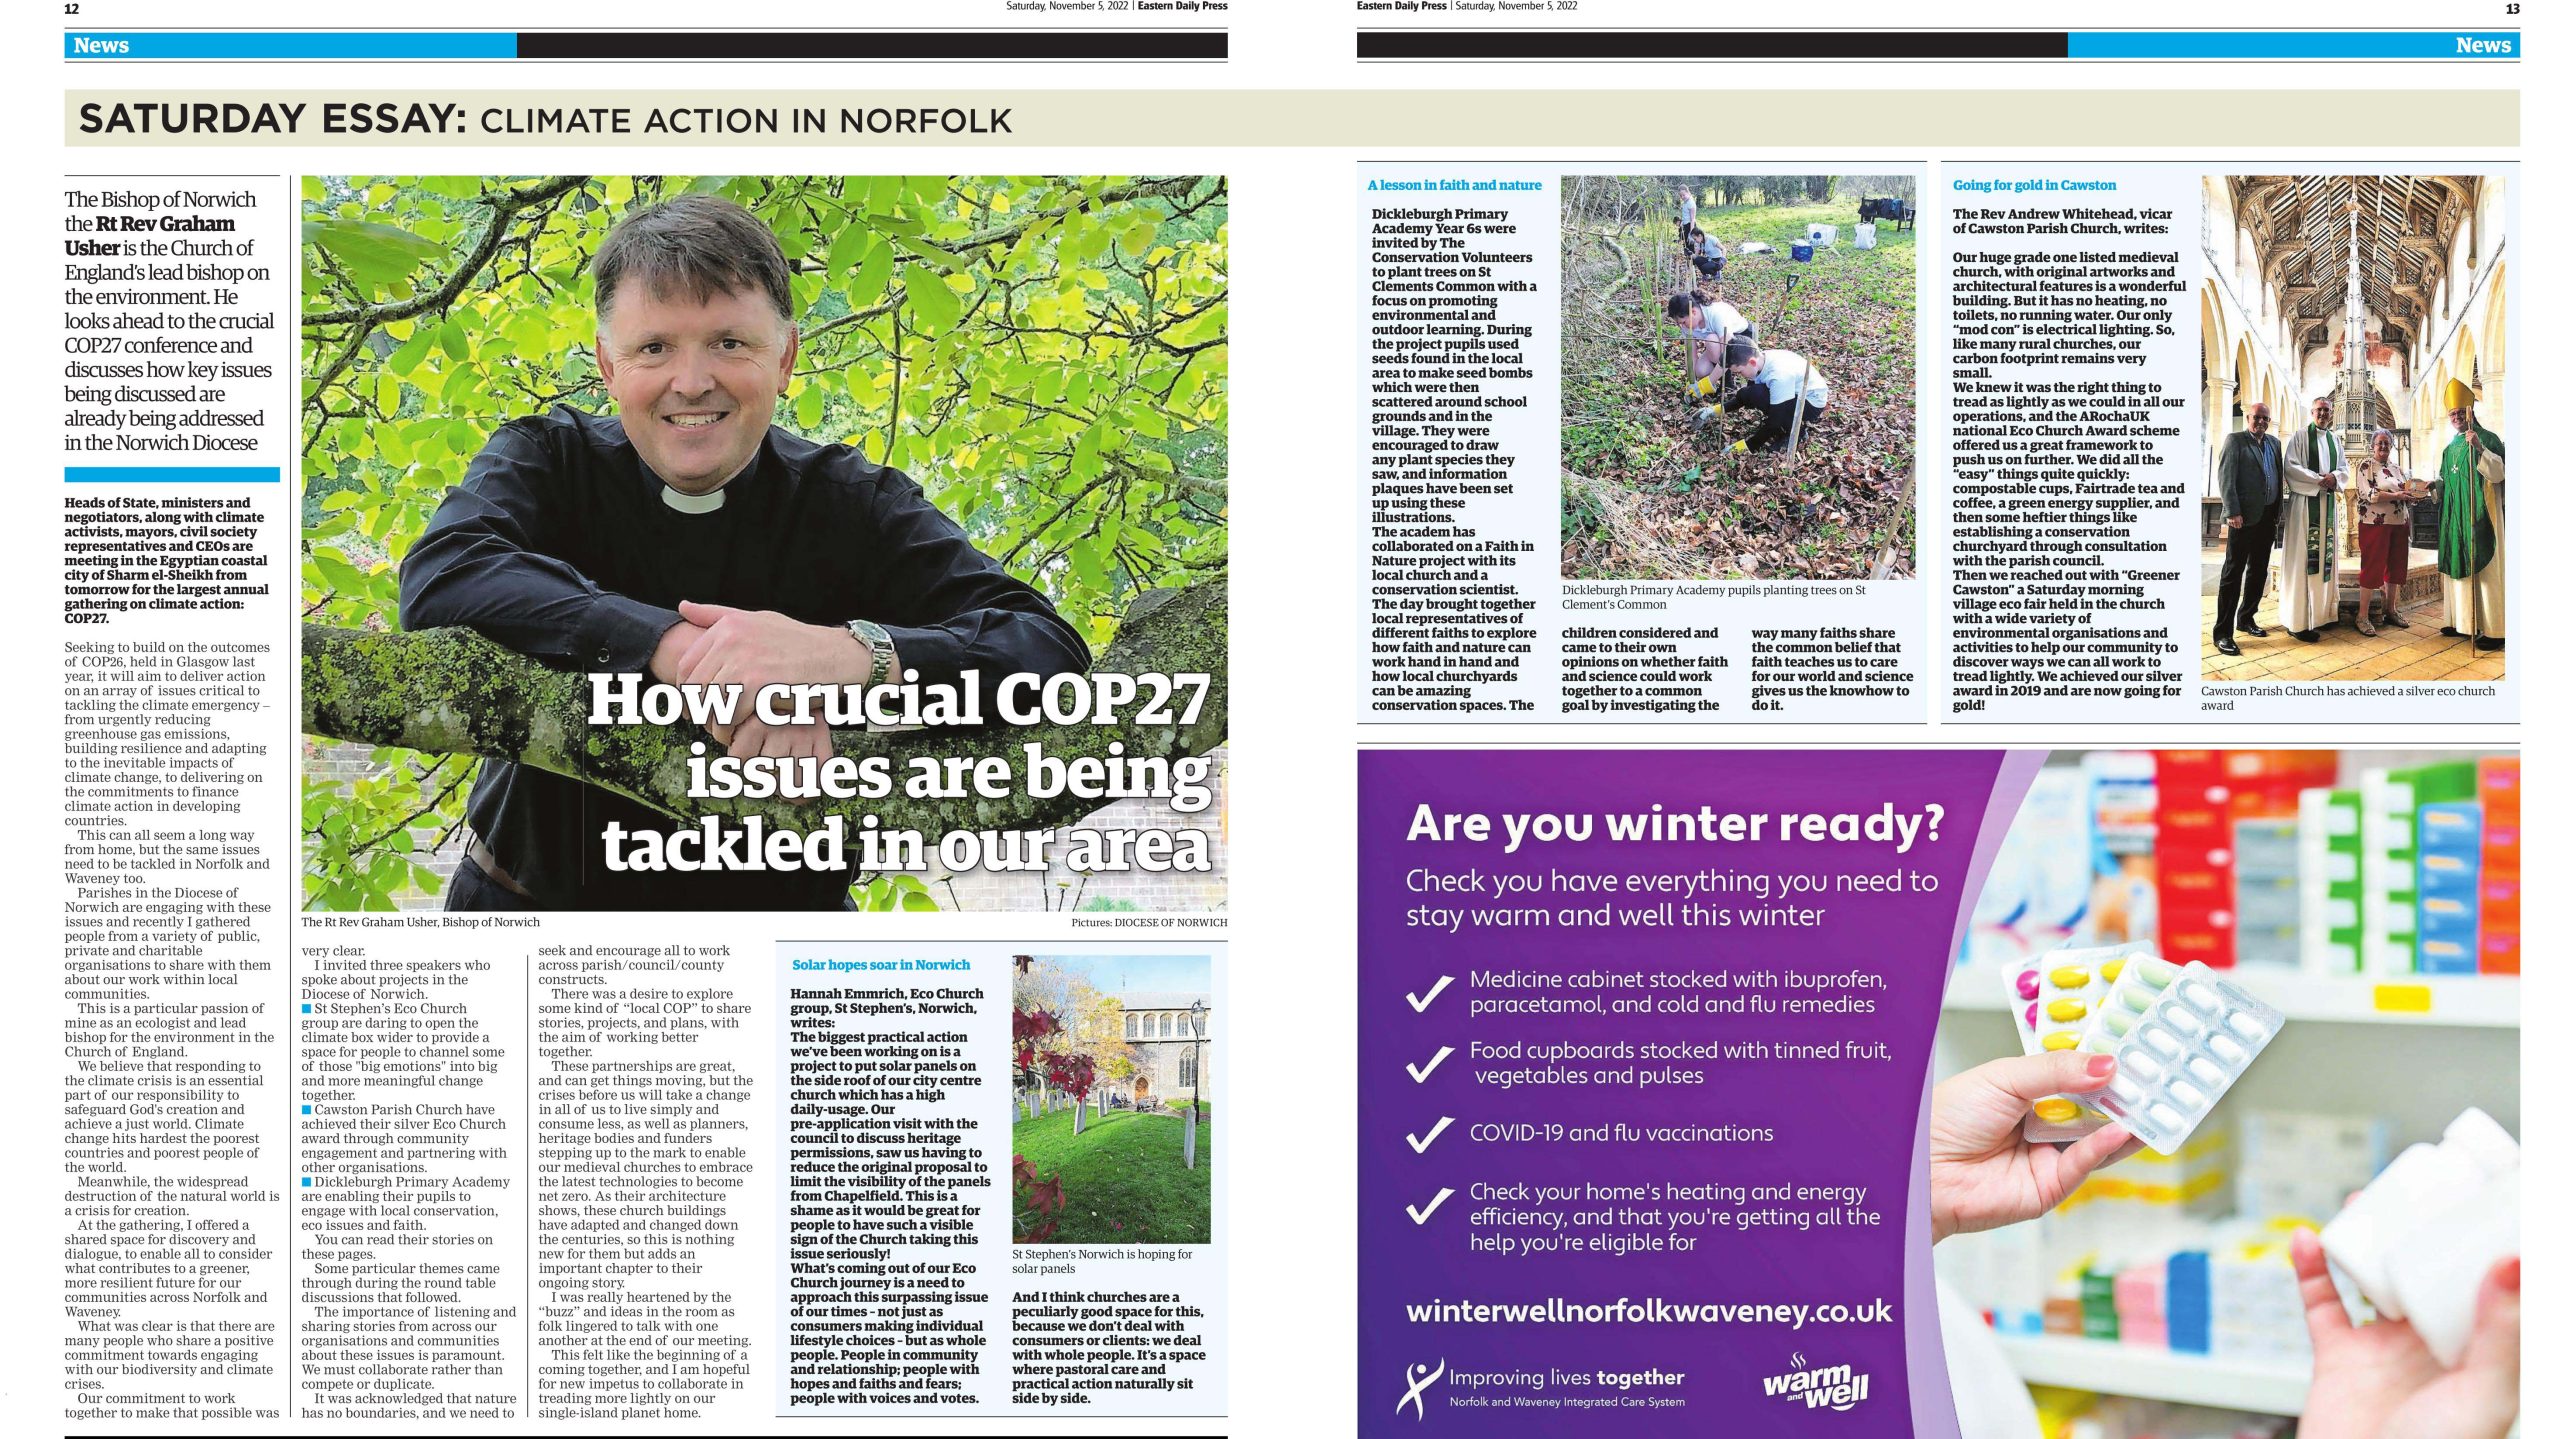 EDP Saturday Essay - 07.11.22 - How crucial COP27 issues are being tackled in our area_Page_1 copy